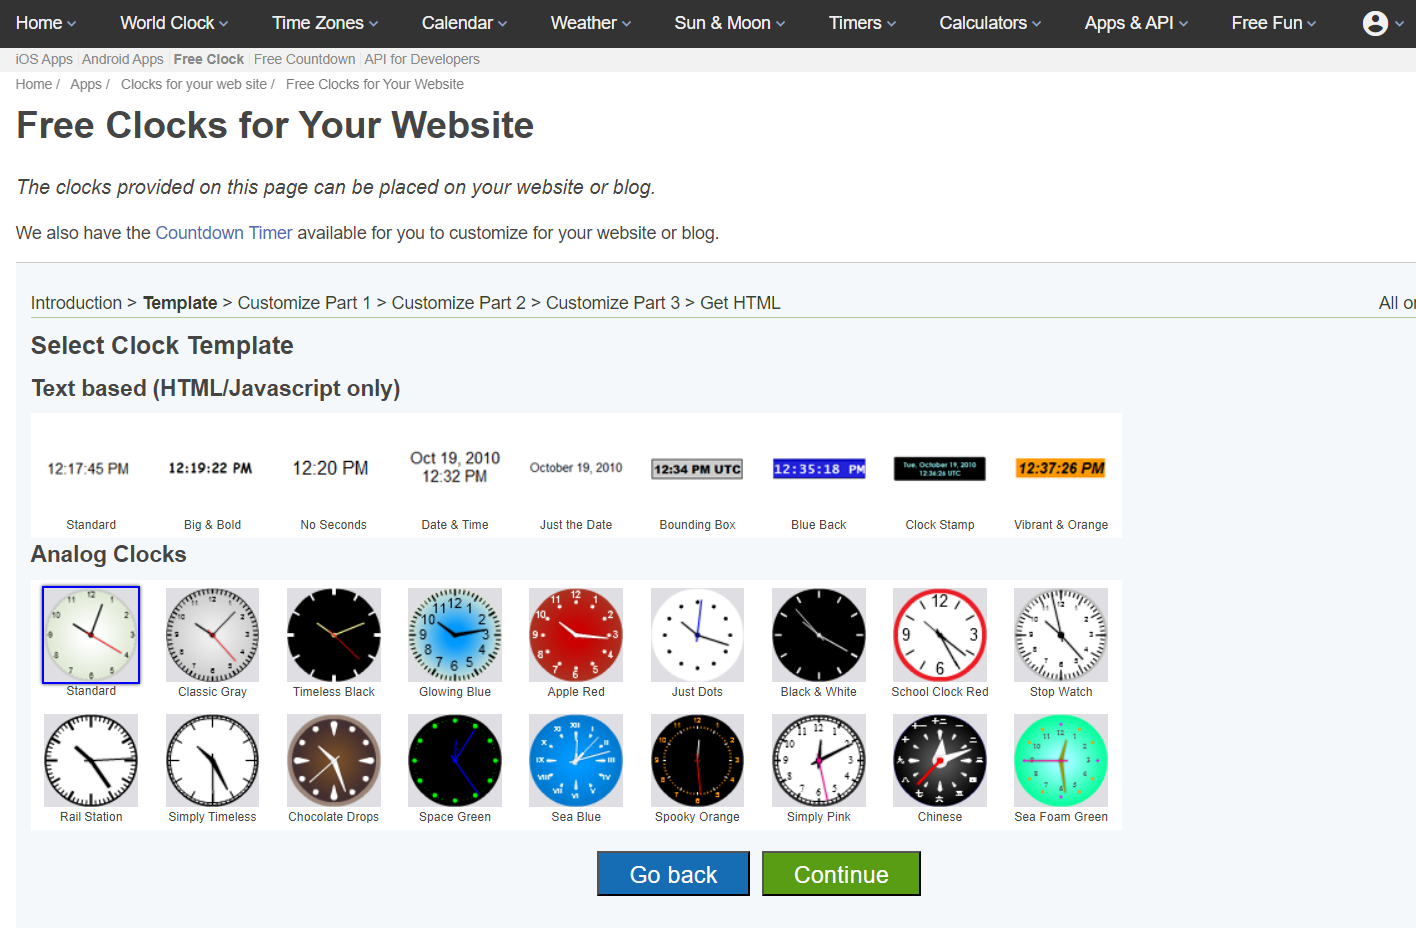 Web page displaying a selection of free digital and analog clock templates for websites, in various styles and colors, with a 'Continue' button below.